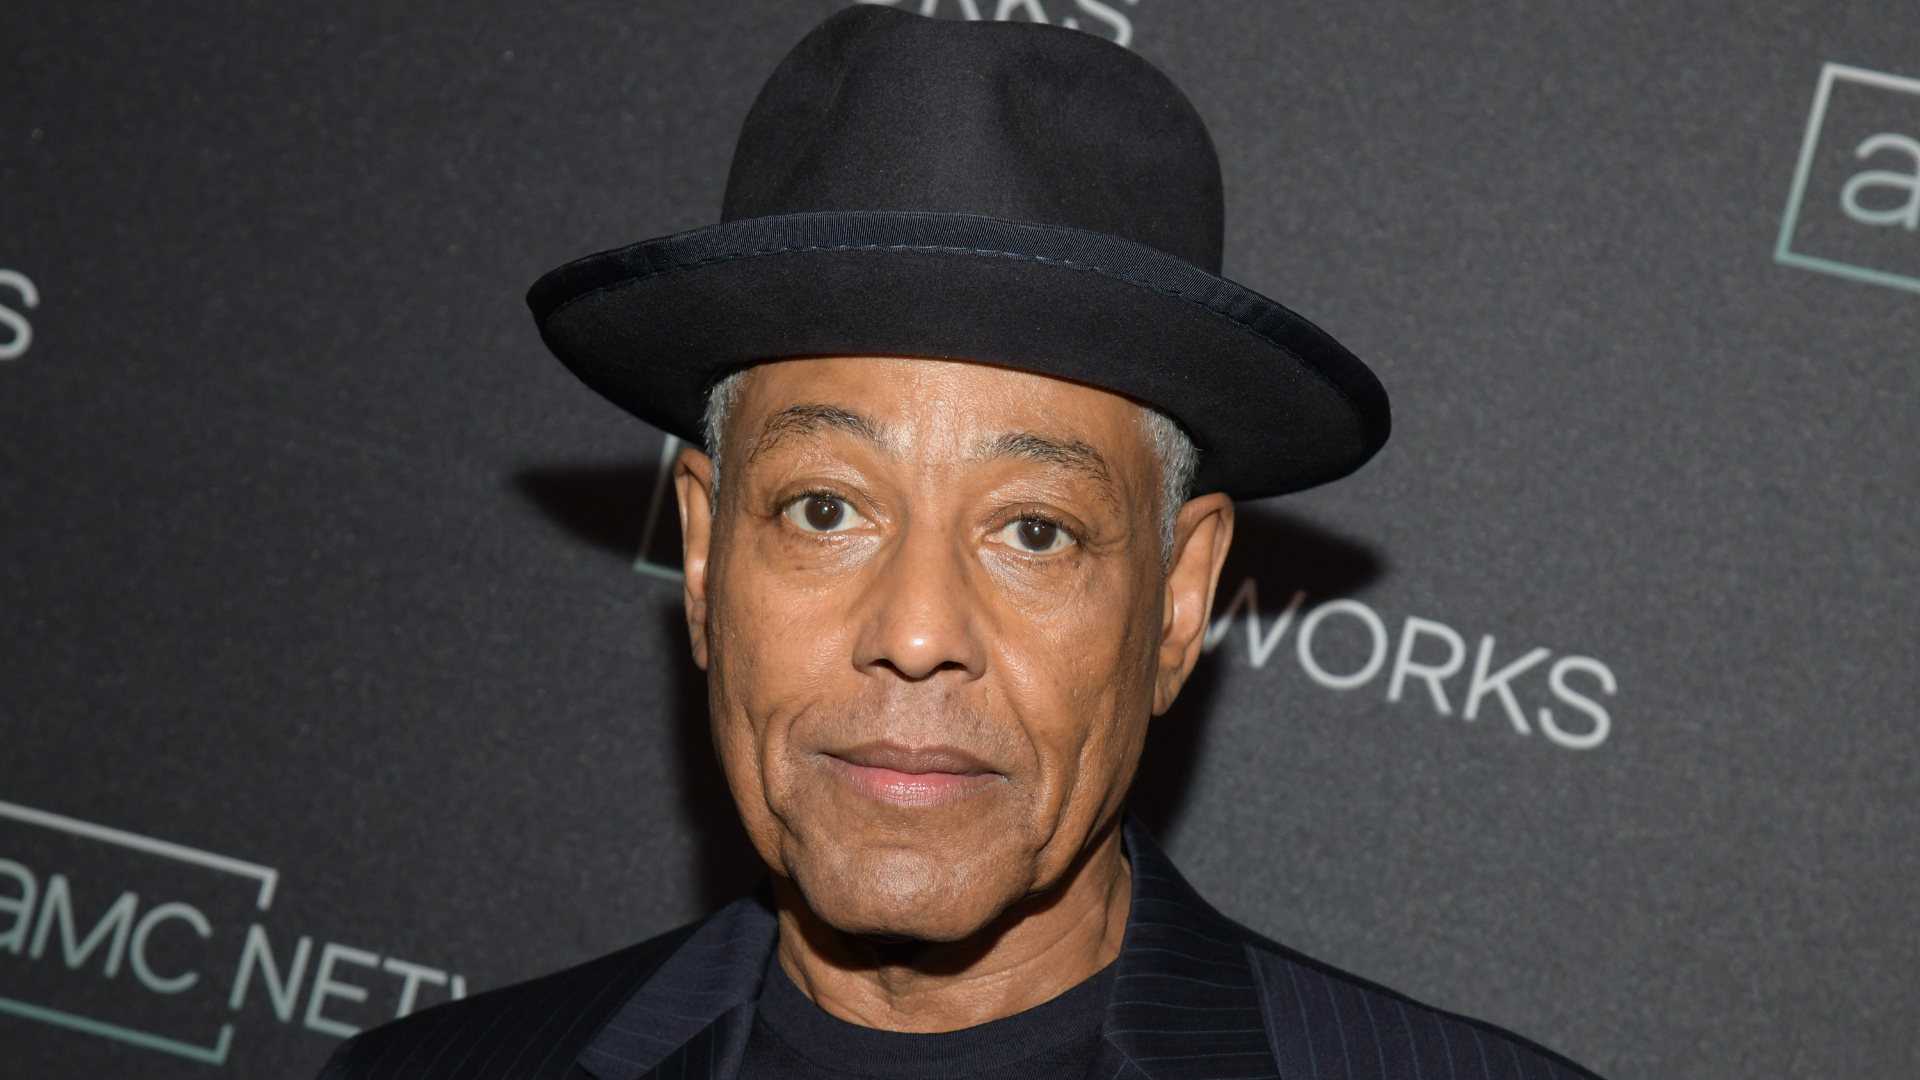 Giancarlo Esposito Reveals Near-Bankruptcy Made Him Consider Plotting His Own Murder Prior to ‘Breaking Bad’